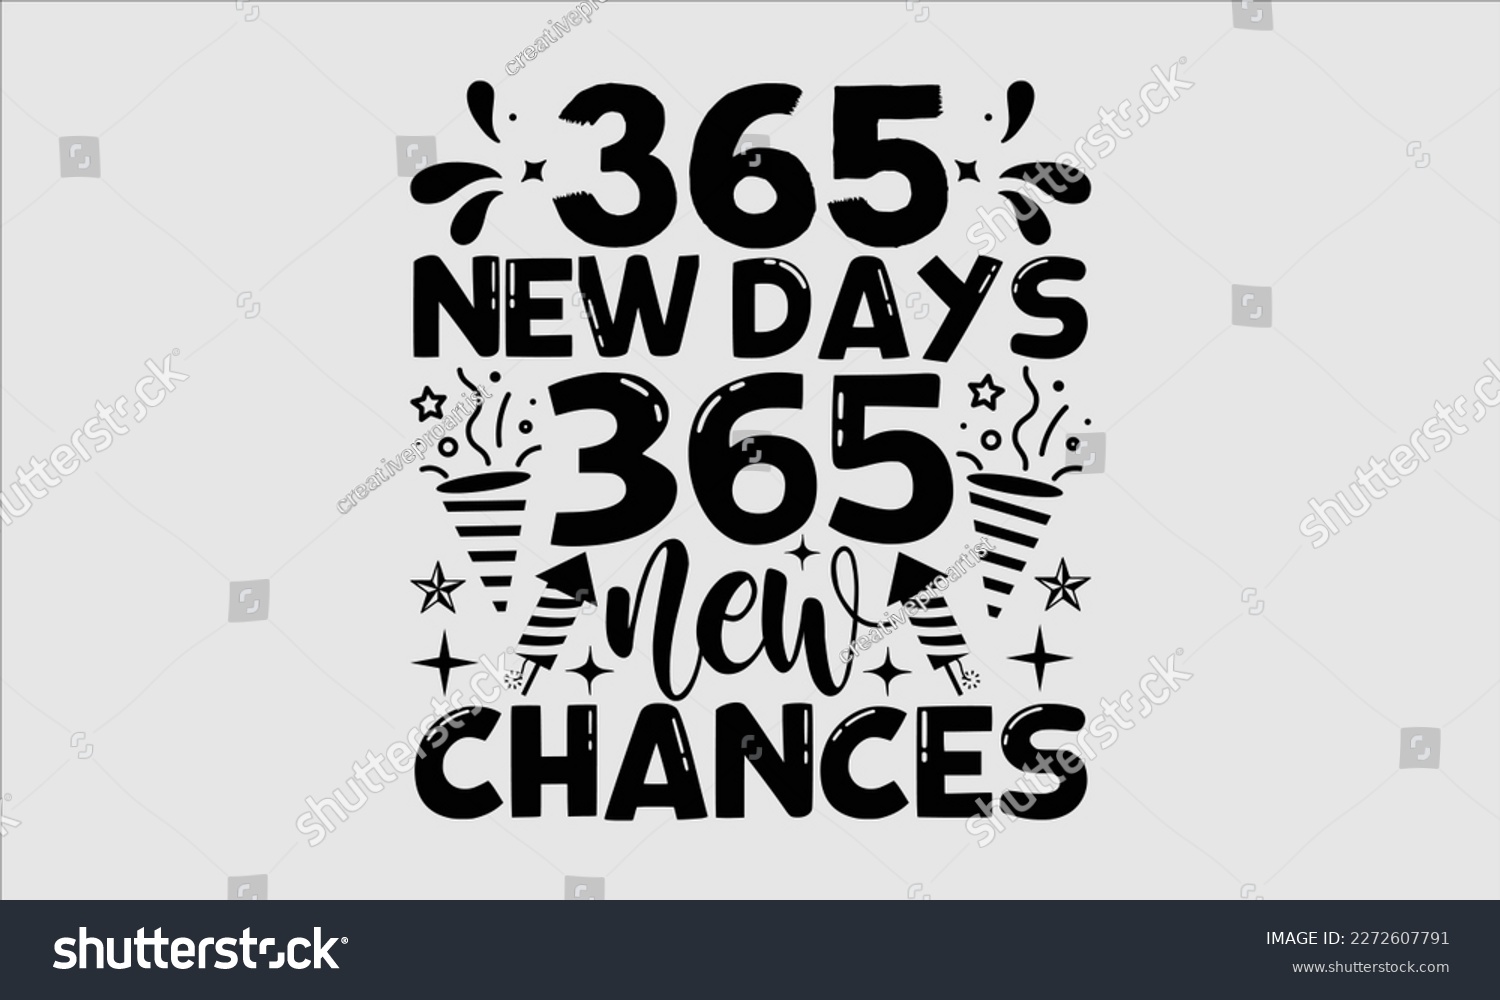 SVG of 365 new days 365 new chances- Happy New Year t shirt Design, Handmade calligraphy vector illustration, stationary for prints on svg and bags, posters svg